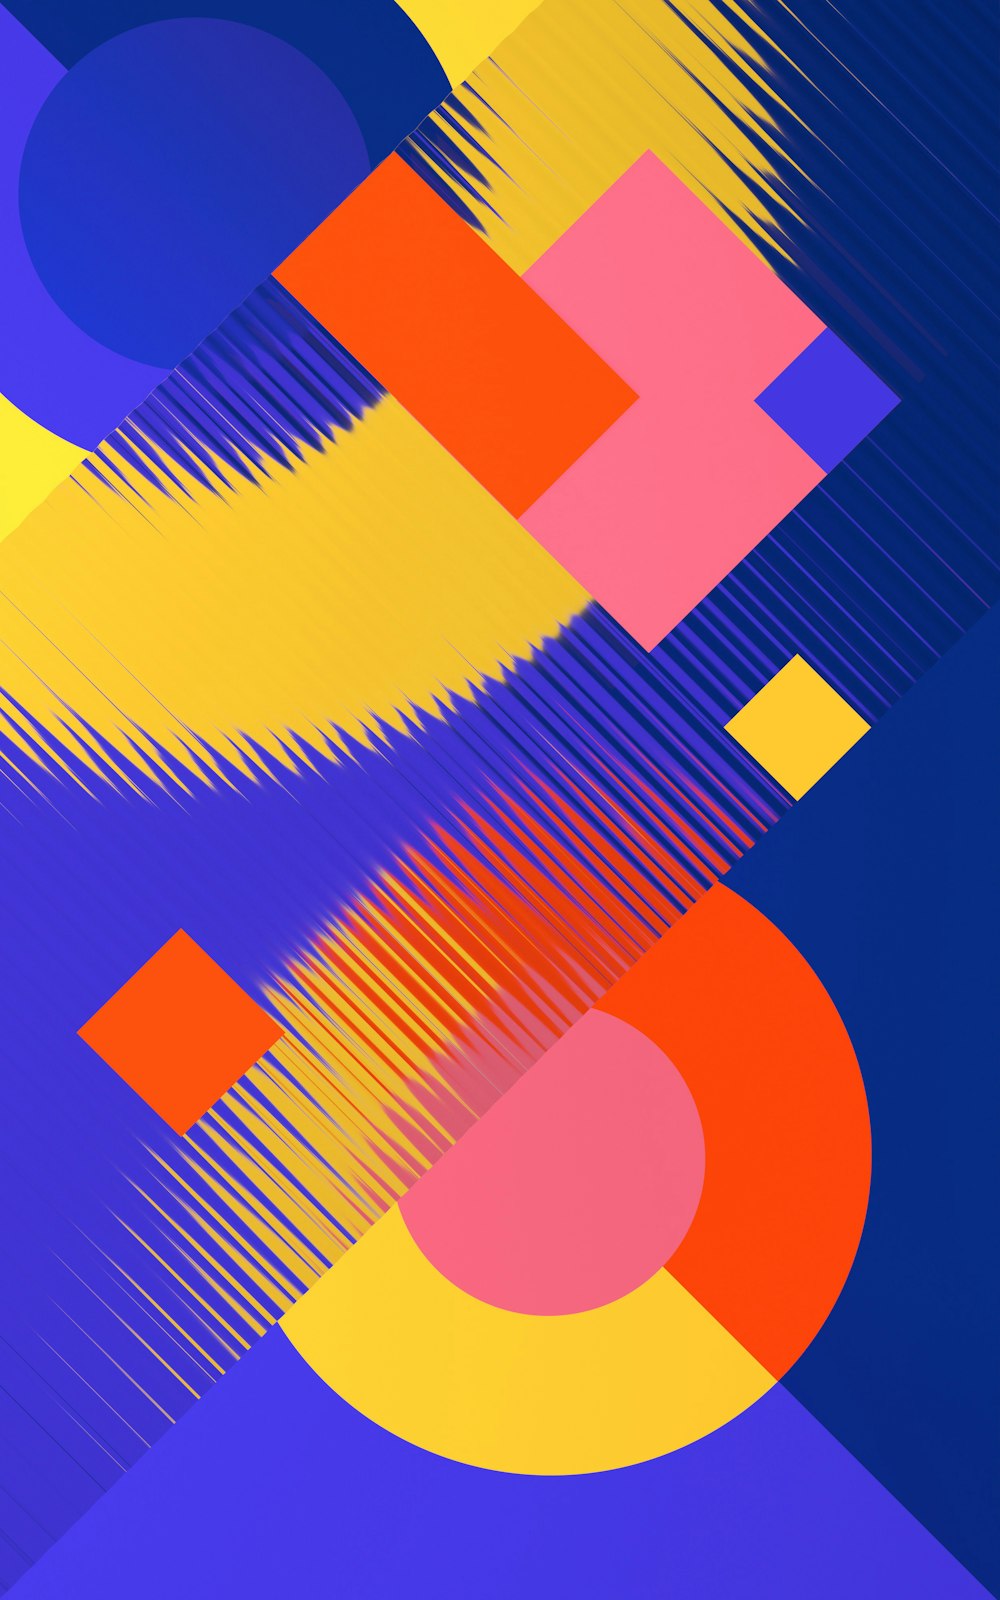 a colorful abstract background with lines and shapes